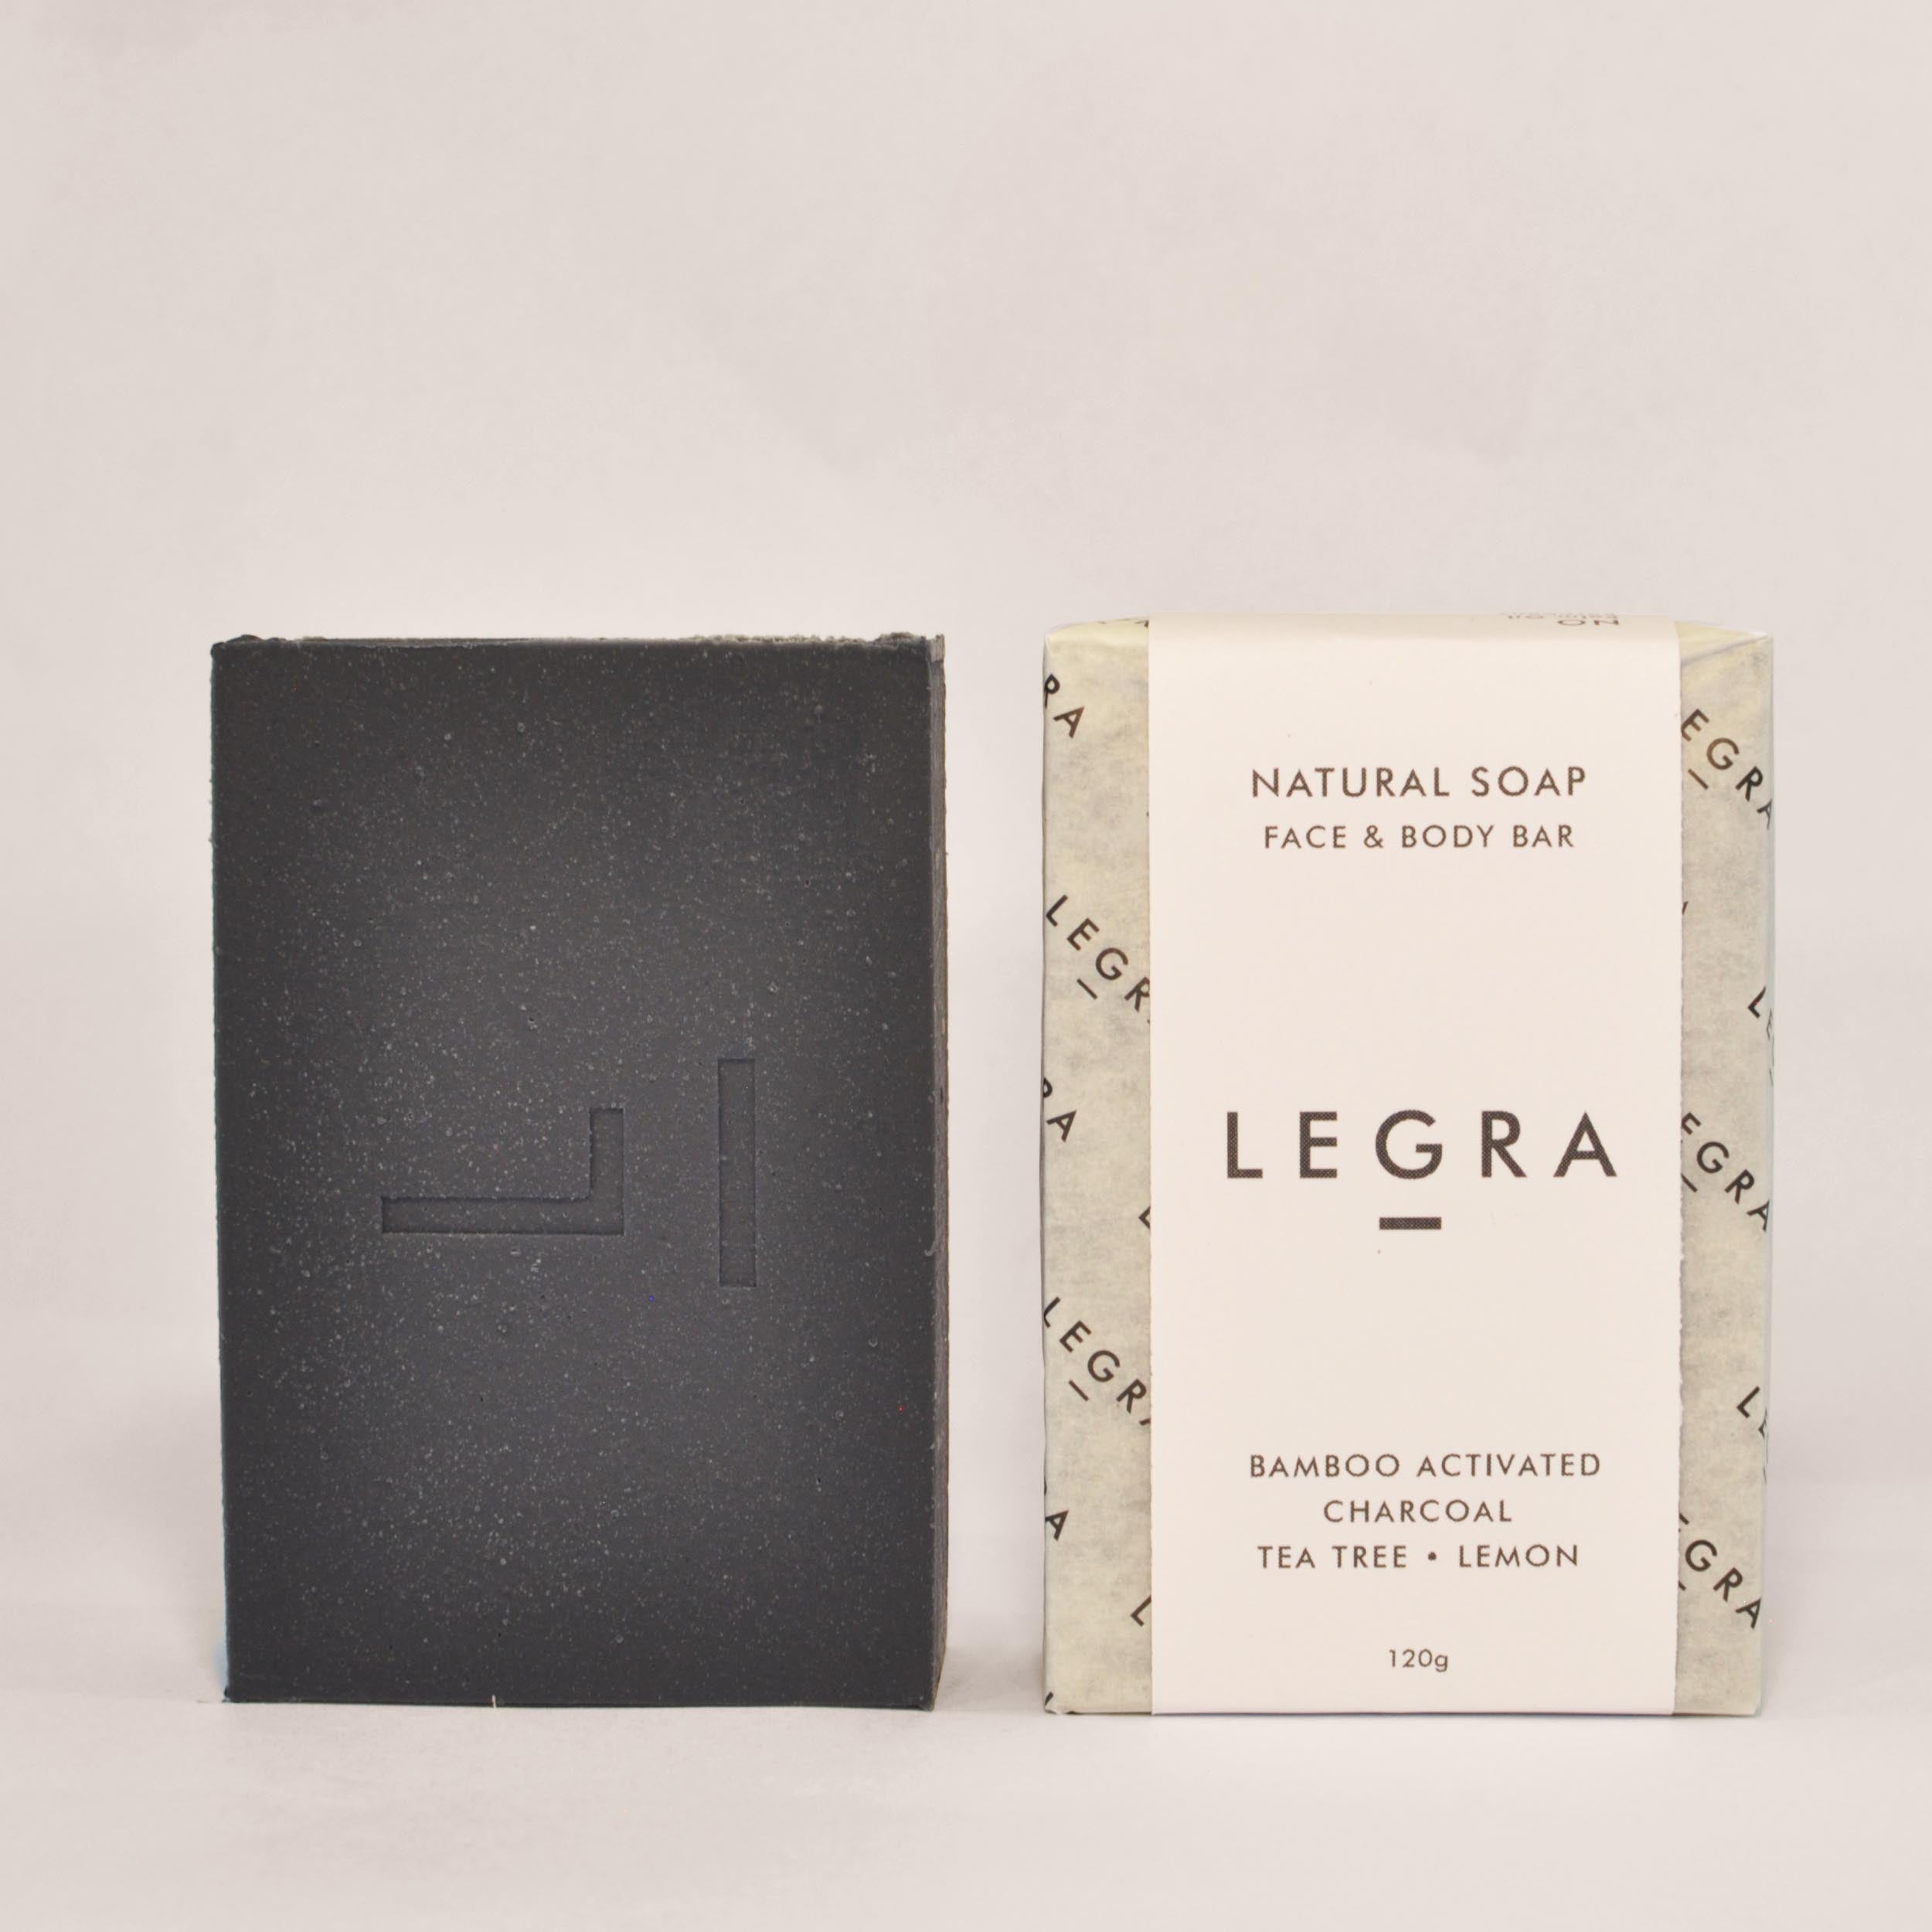 Legra sápa - Bamboo activated charcoal